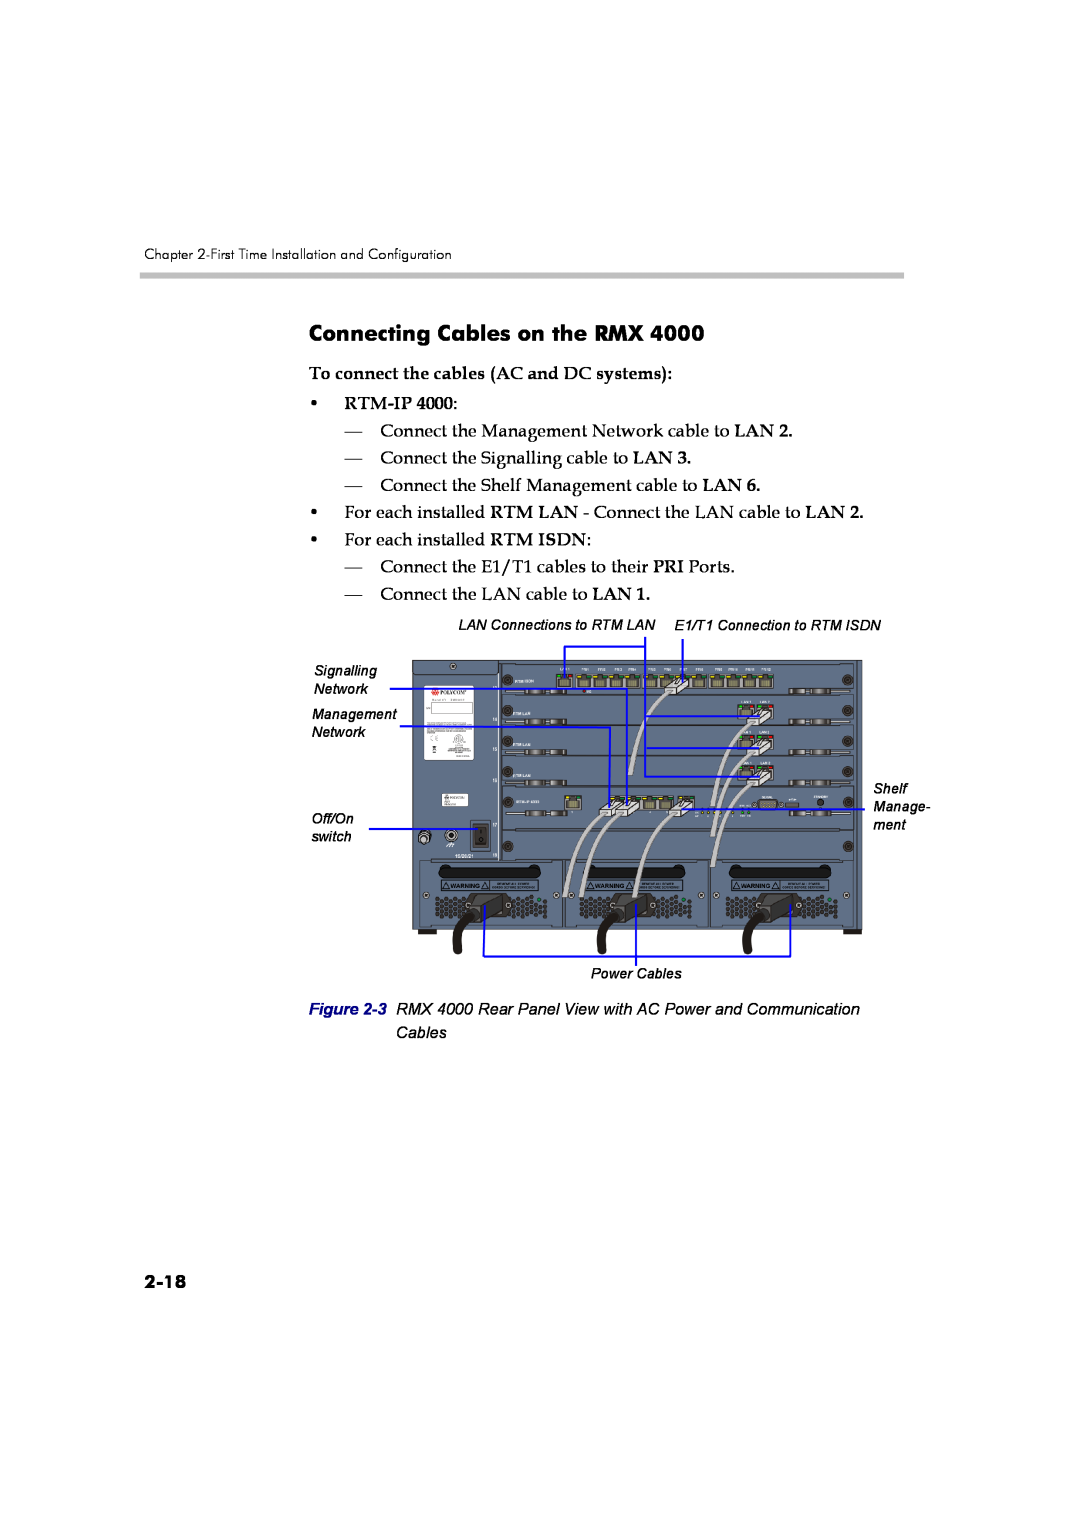 Polycom DOC2560B manual To connect the cables AC and DC systems RTM-IP, 2-18, Connecting Cables on the RMX 